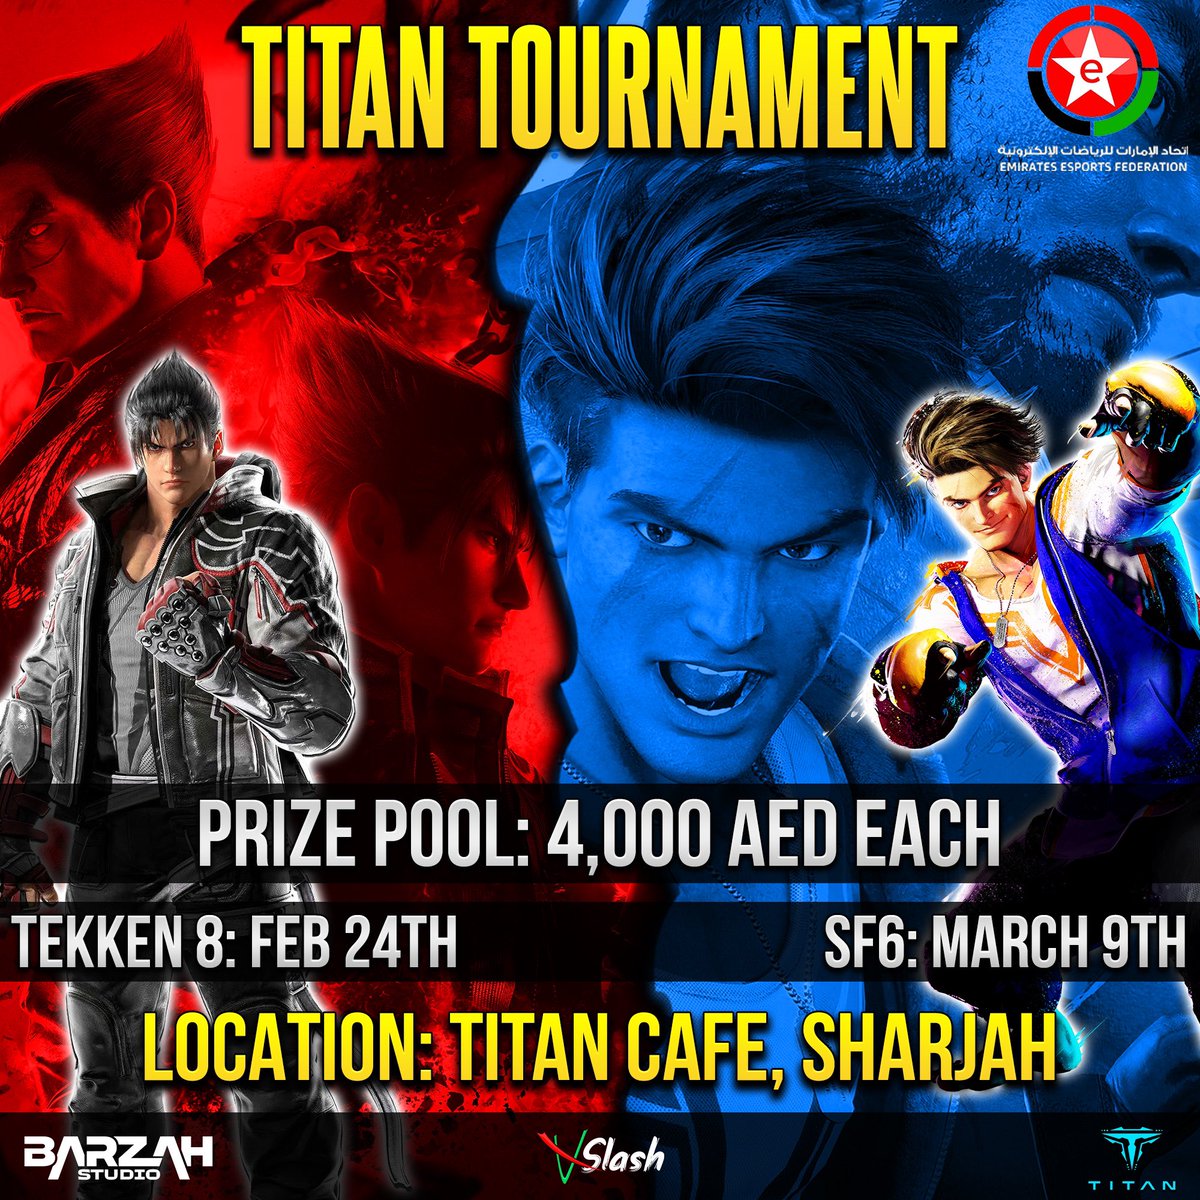 TITAN, @VslashEsports, and @Barzahstudio are teaming up for another monthly tournament! Exciting news – we're introducing Tekken 8 to our lineup! 🔥 Street Fighter 6 champs, fear not – we kick off March with our 5th SF6 tournament! 🎮🏆